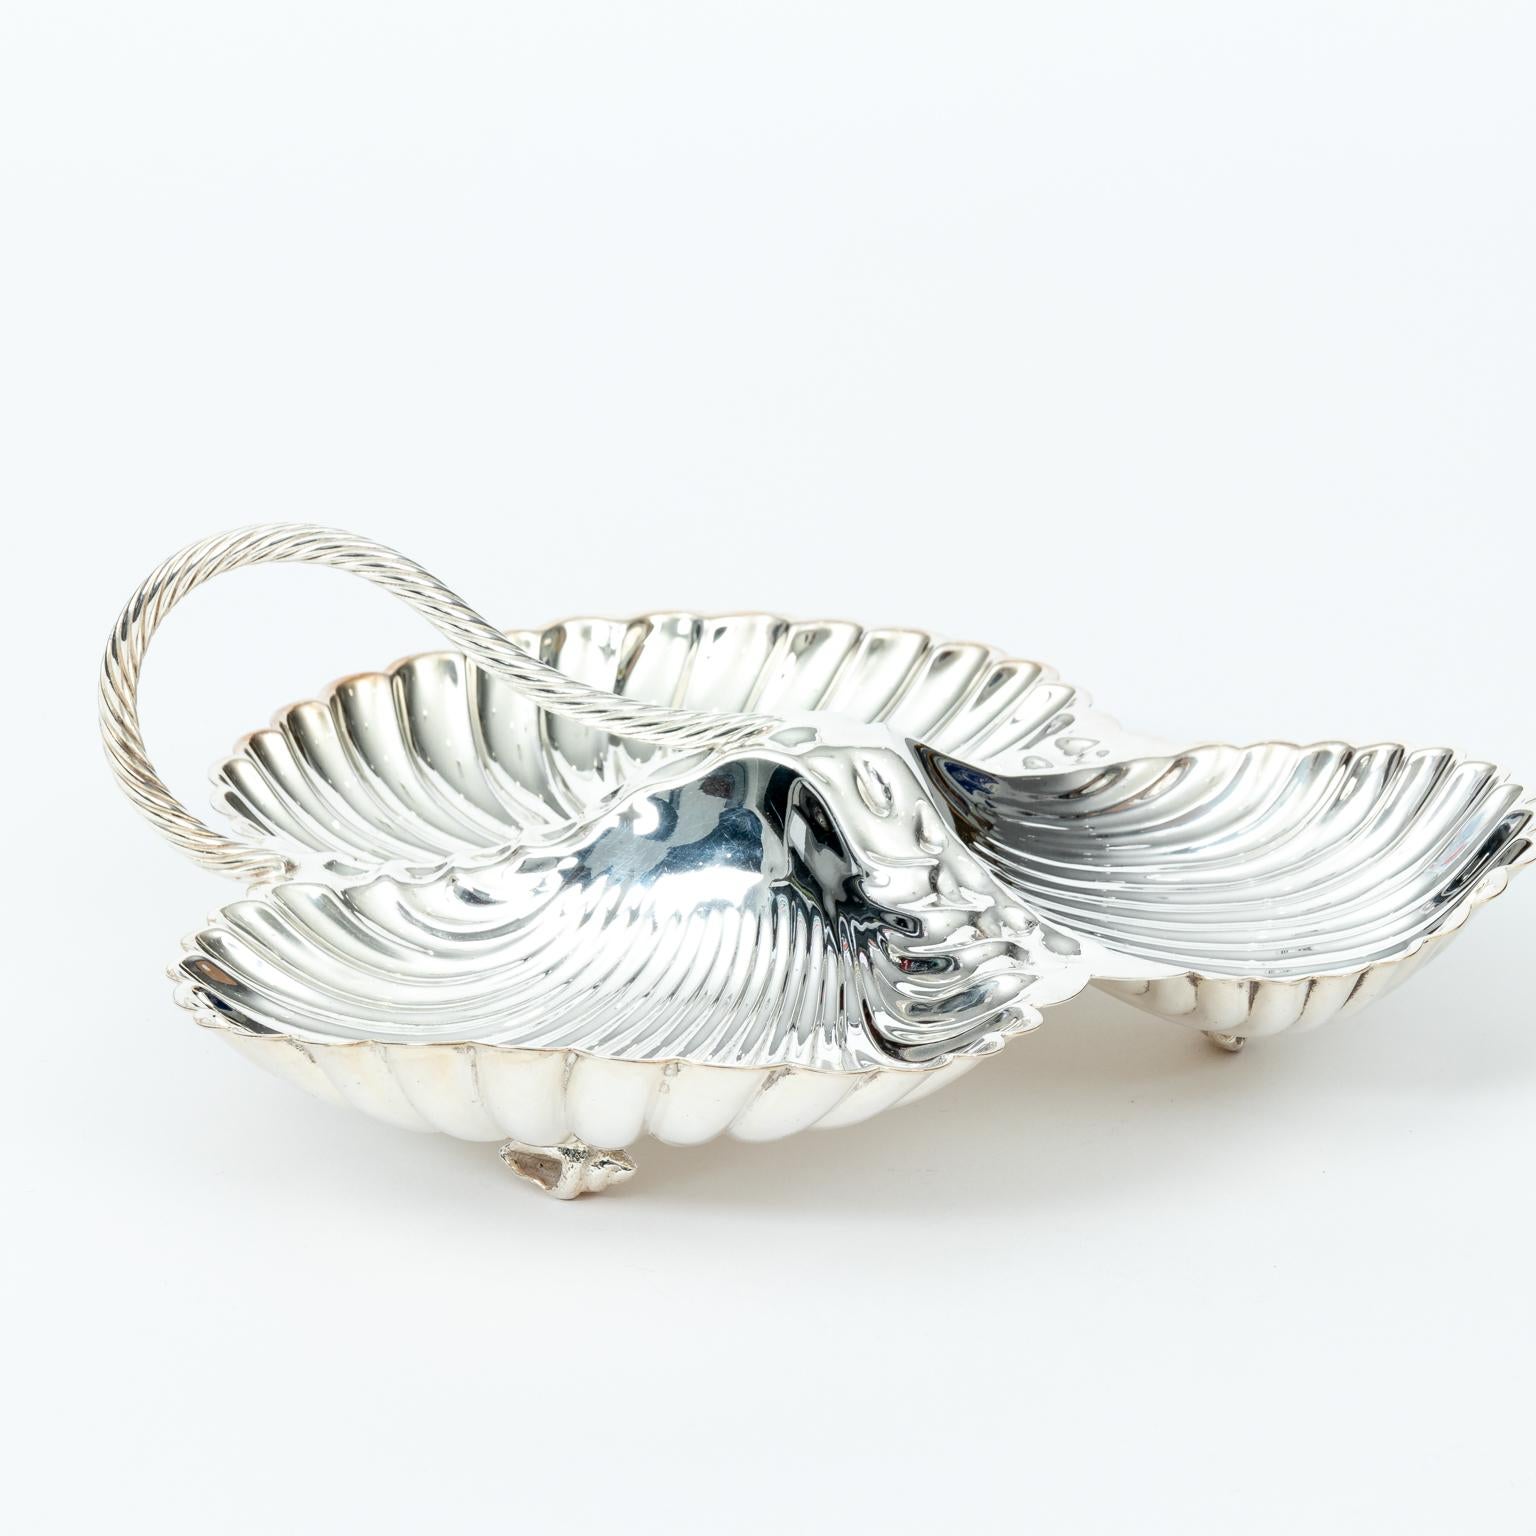 English silver plate tri section scallop shell serving dish, circa late 1940s. Please note of wear consistent with age. Made in England.